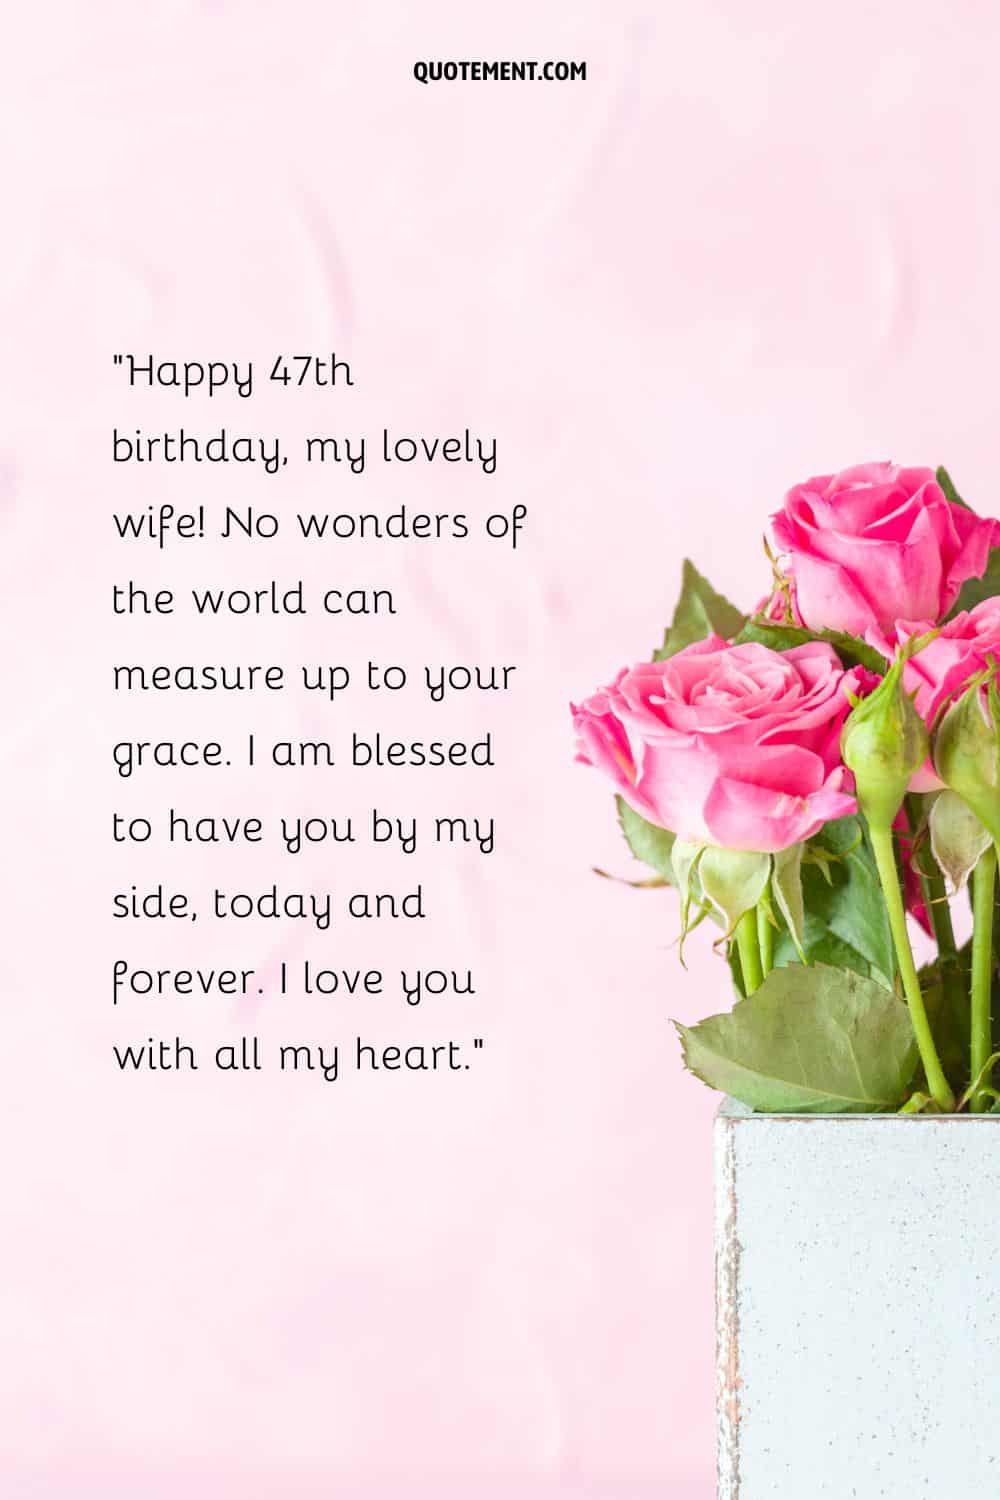 Lovely message for a wife who turns 47 and pink roses next to it
